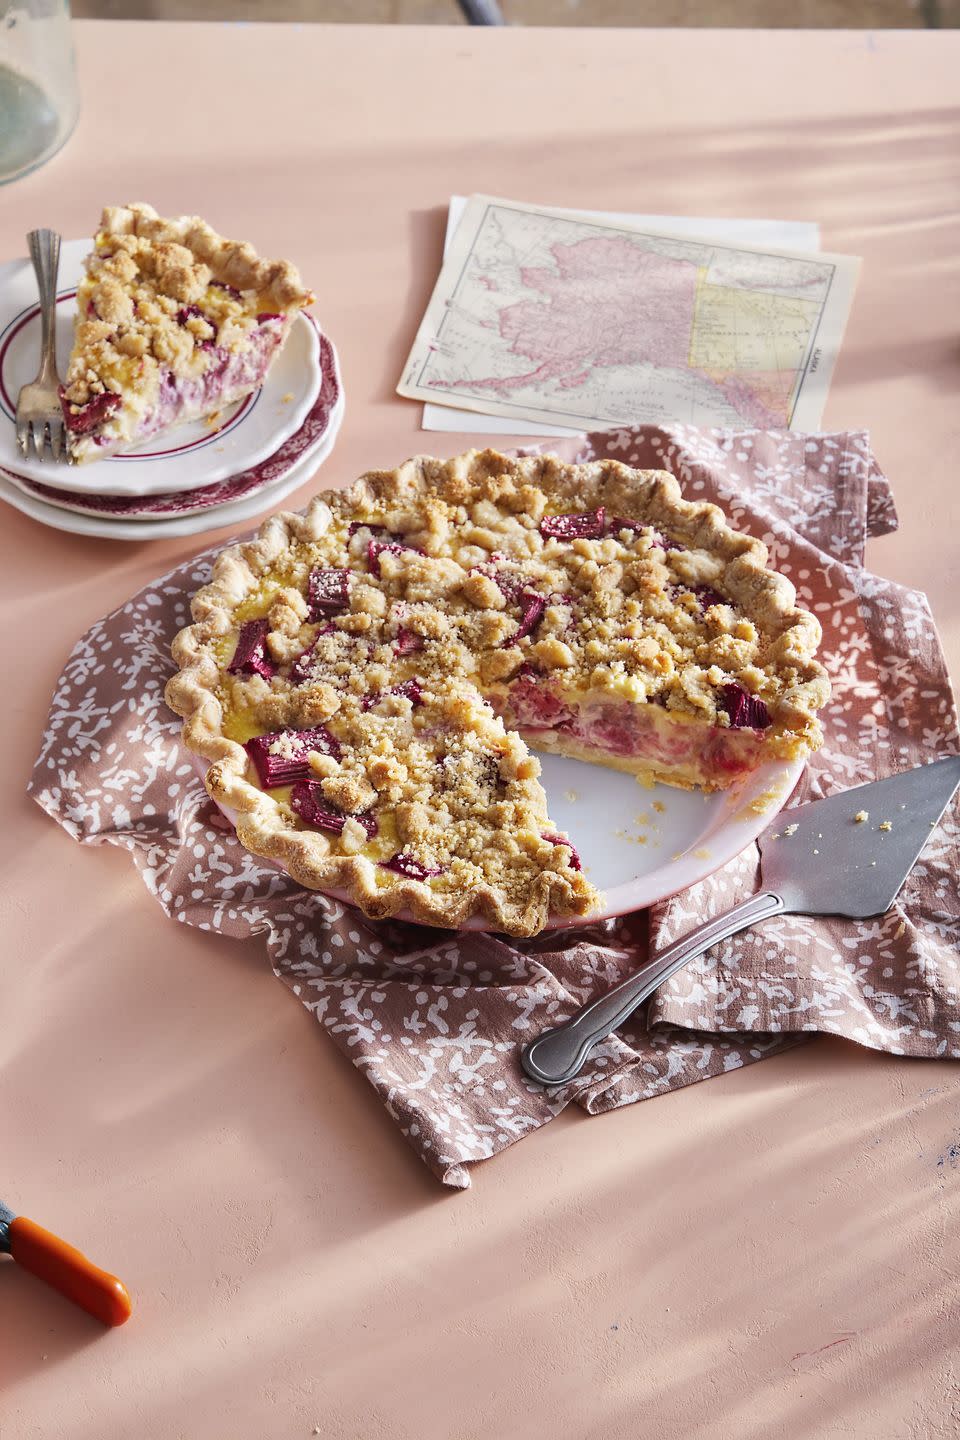 rhubarb custard pie in a pie plate with a slice removed to show the inside